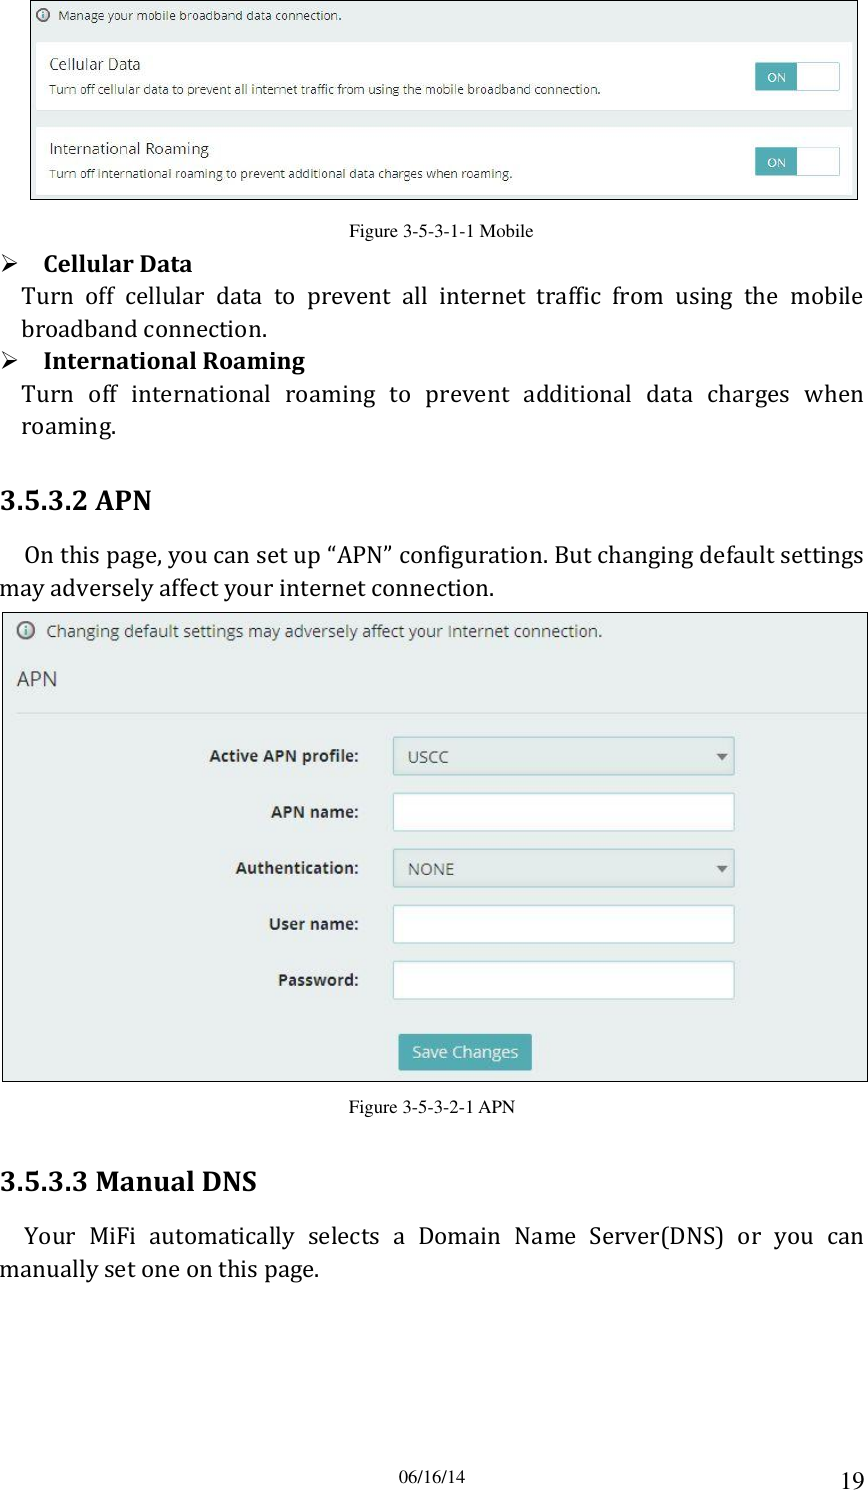 06/16/14 19  Figure 3-5-3-1-1 Mobile  Cellular Data Turn  off  cellular  data  to  prevent  all  internet  traffic  from  using  the  mobile broadband connection.  International Roaming Turn  off  international  roaming  to  prevent  additional  data  charges  when roaming. 3.5.3.2 APN On this page, you can set up “APN” configuration. But changing default settings may adversely affect your internet connection.  Figure 3-5-3-2-1 APN 3.5.3.3 Manual DNS Your  MiFi  automatically  selects  a  Domain  Name  Server(DNS)  or  you  can manually set one on this page. 